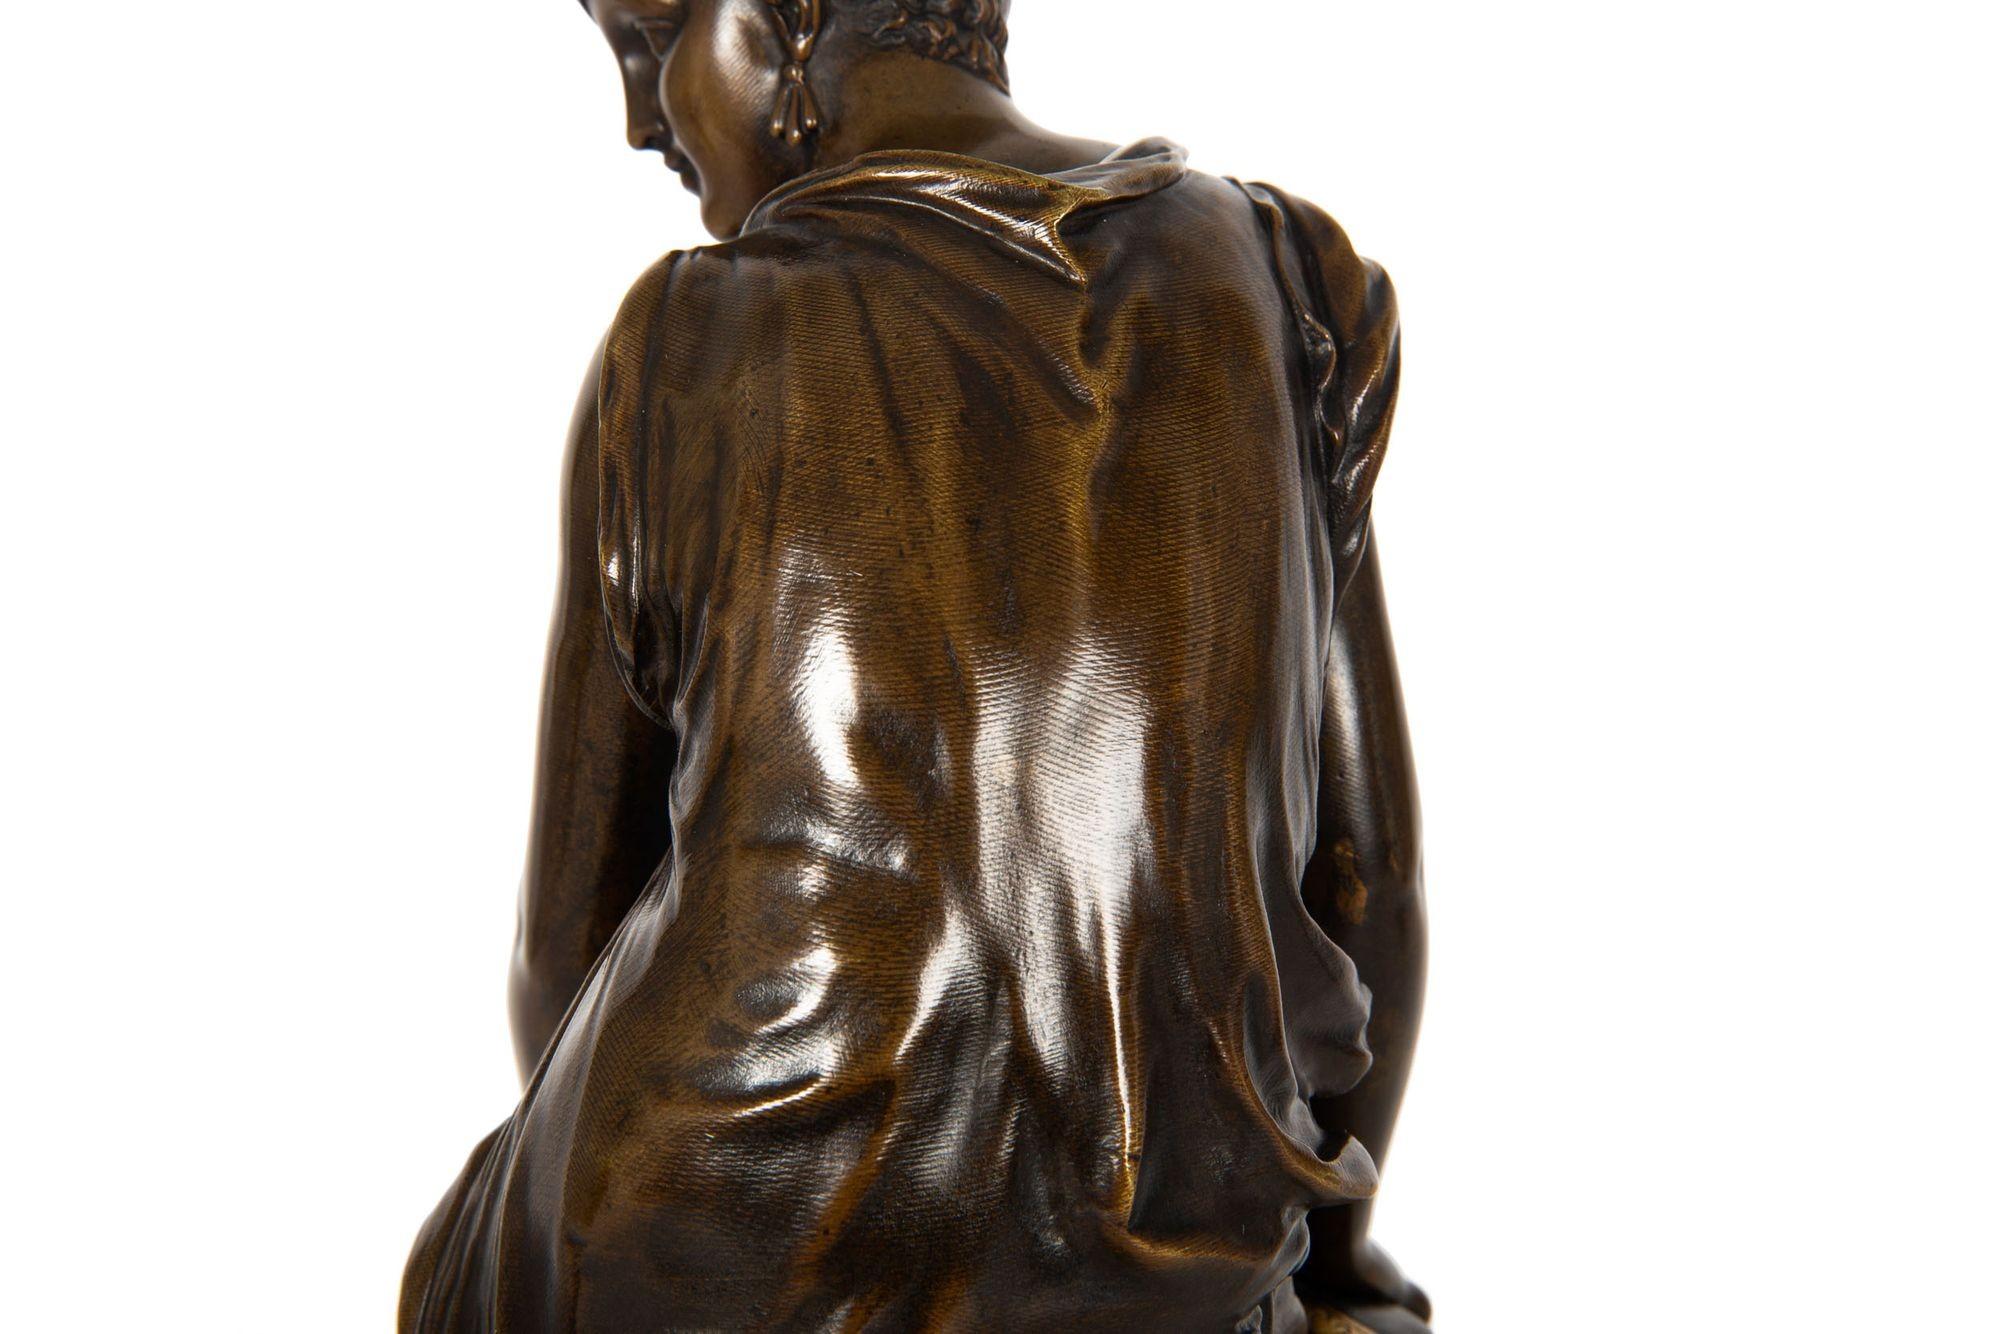 French Bronze Sculpture Seated Woman by Etienne-Henri Dumaige For Sale 7